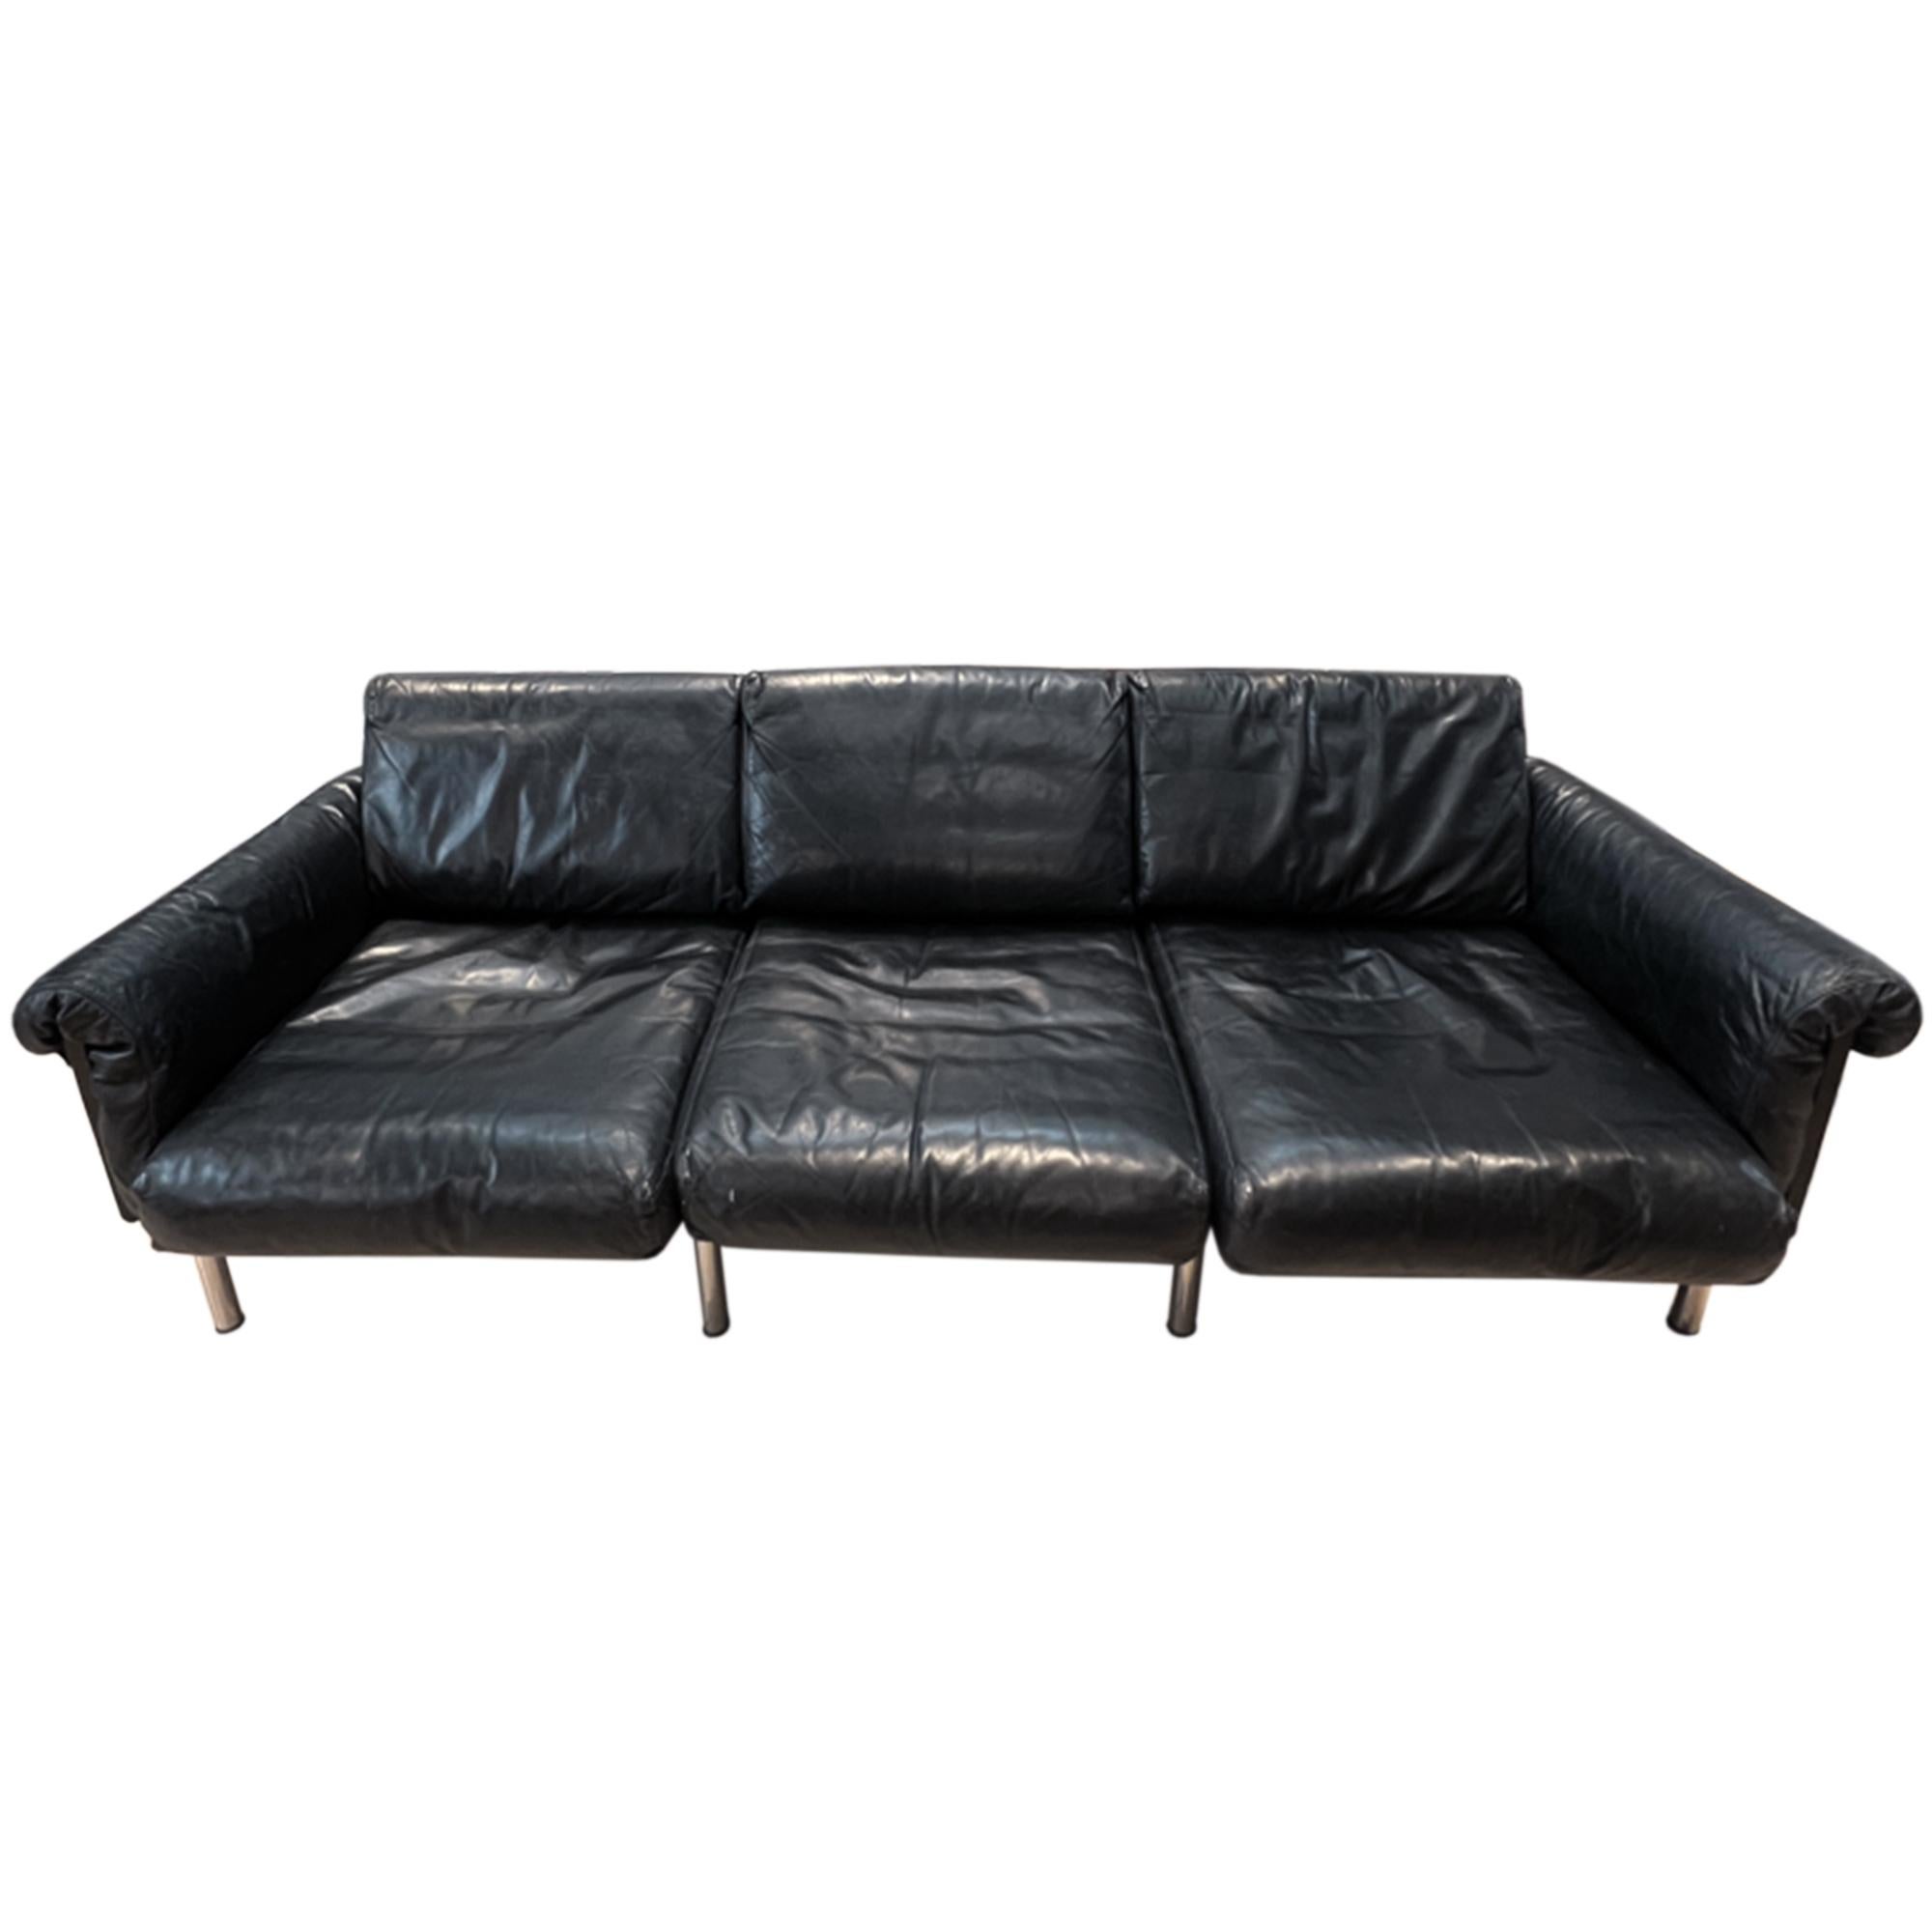 A fabulous black vintage Ateljee leather sofa, this piece was designed by Yrjo Kukkapuro and was made in Finland in 1963. 

Crafted from beautiful black leather, ebonized wood and chromed metal legs.

We've had the leather fully restored and